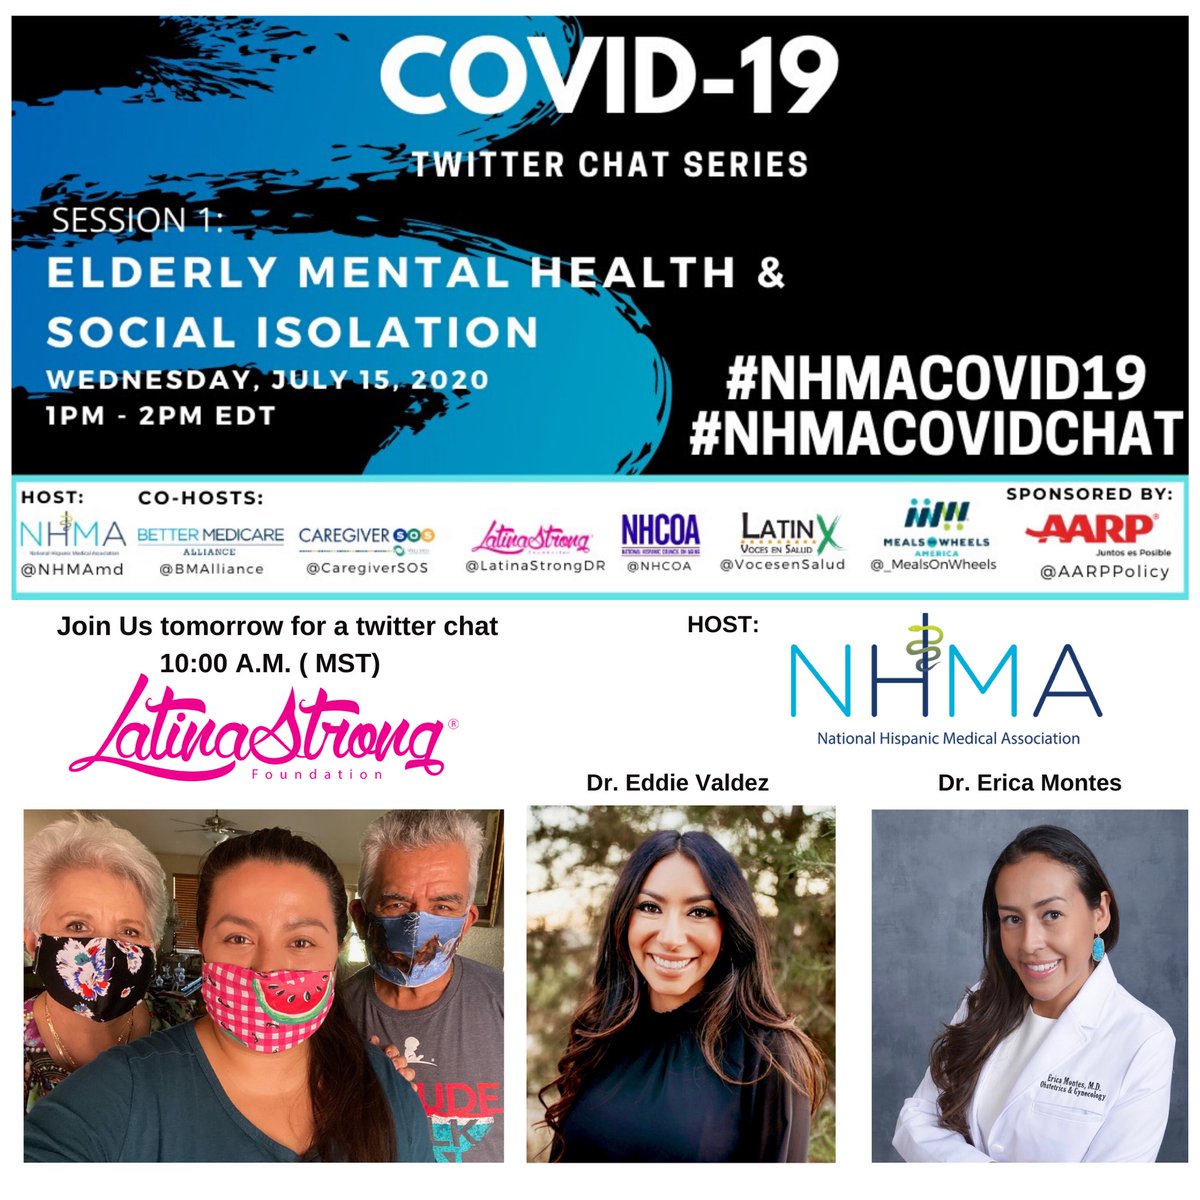 Join us tomorrow for a twitter chat sponsored by @aarp and hosted by @nhmamd ⠀
co-hosted by @vocesensalud @nhcoa @BMAlliance @CaregiverSOS @mealsonwheelsamerica ⠀
⠀
#NHMACovid19 #NHMACovidChat #CovidConversations #LatinaStrong #LatinoHealthLeaders ⠀
⠀